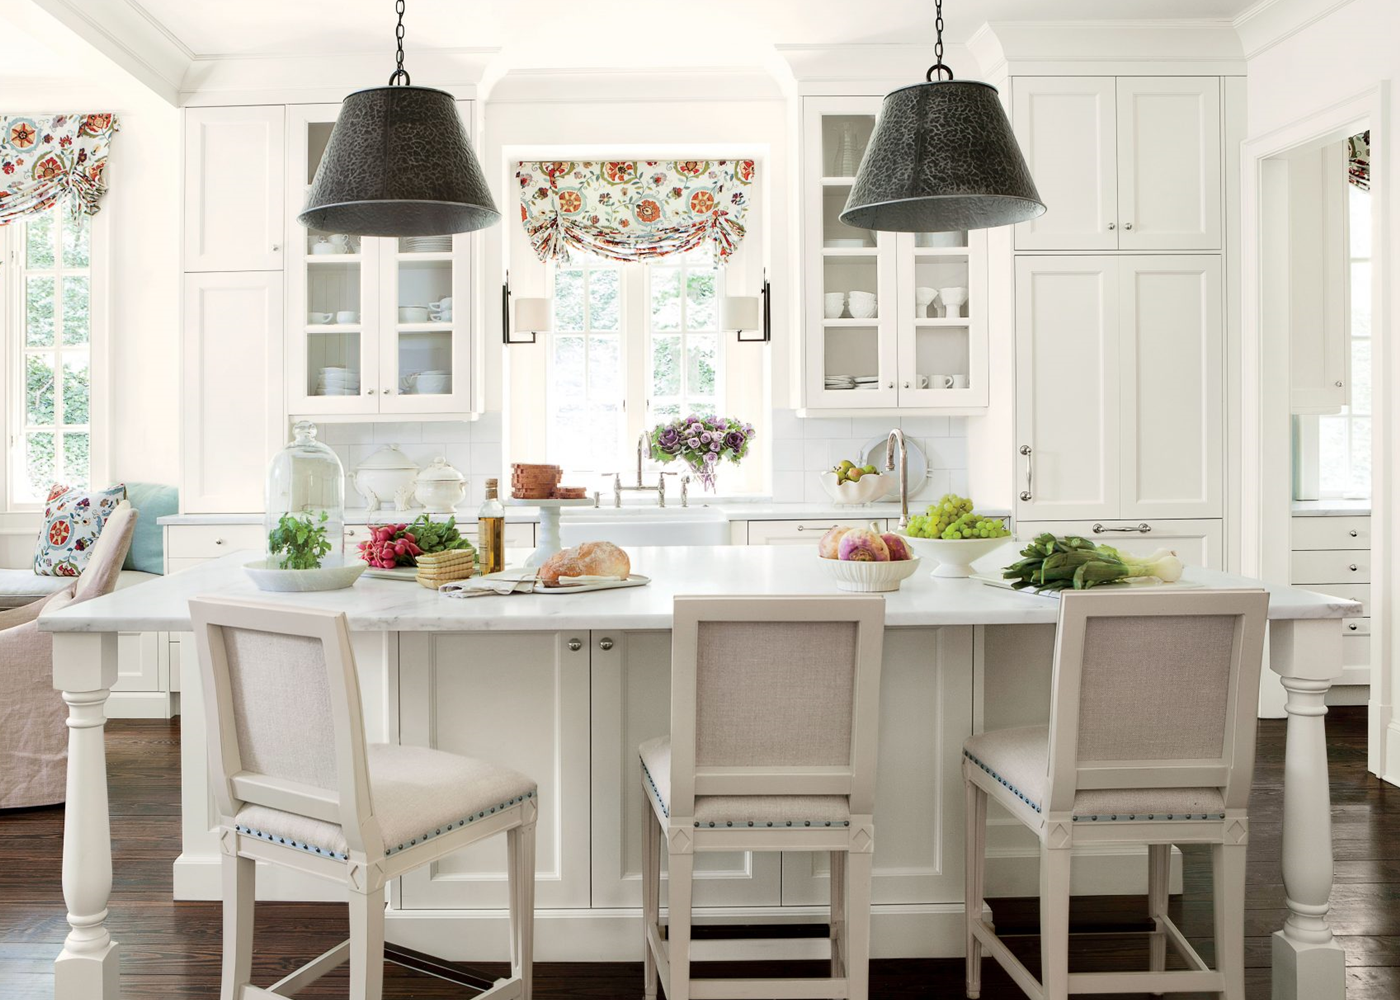 Kitchen With Colorful Patterned Roman Shades